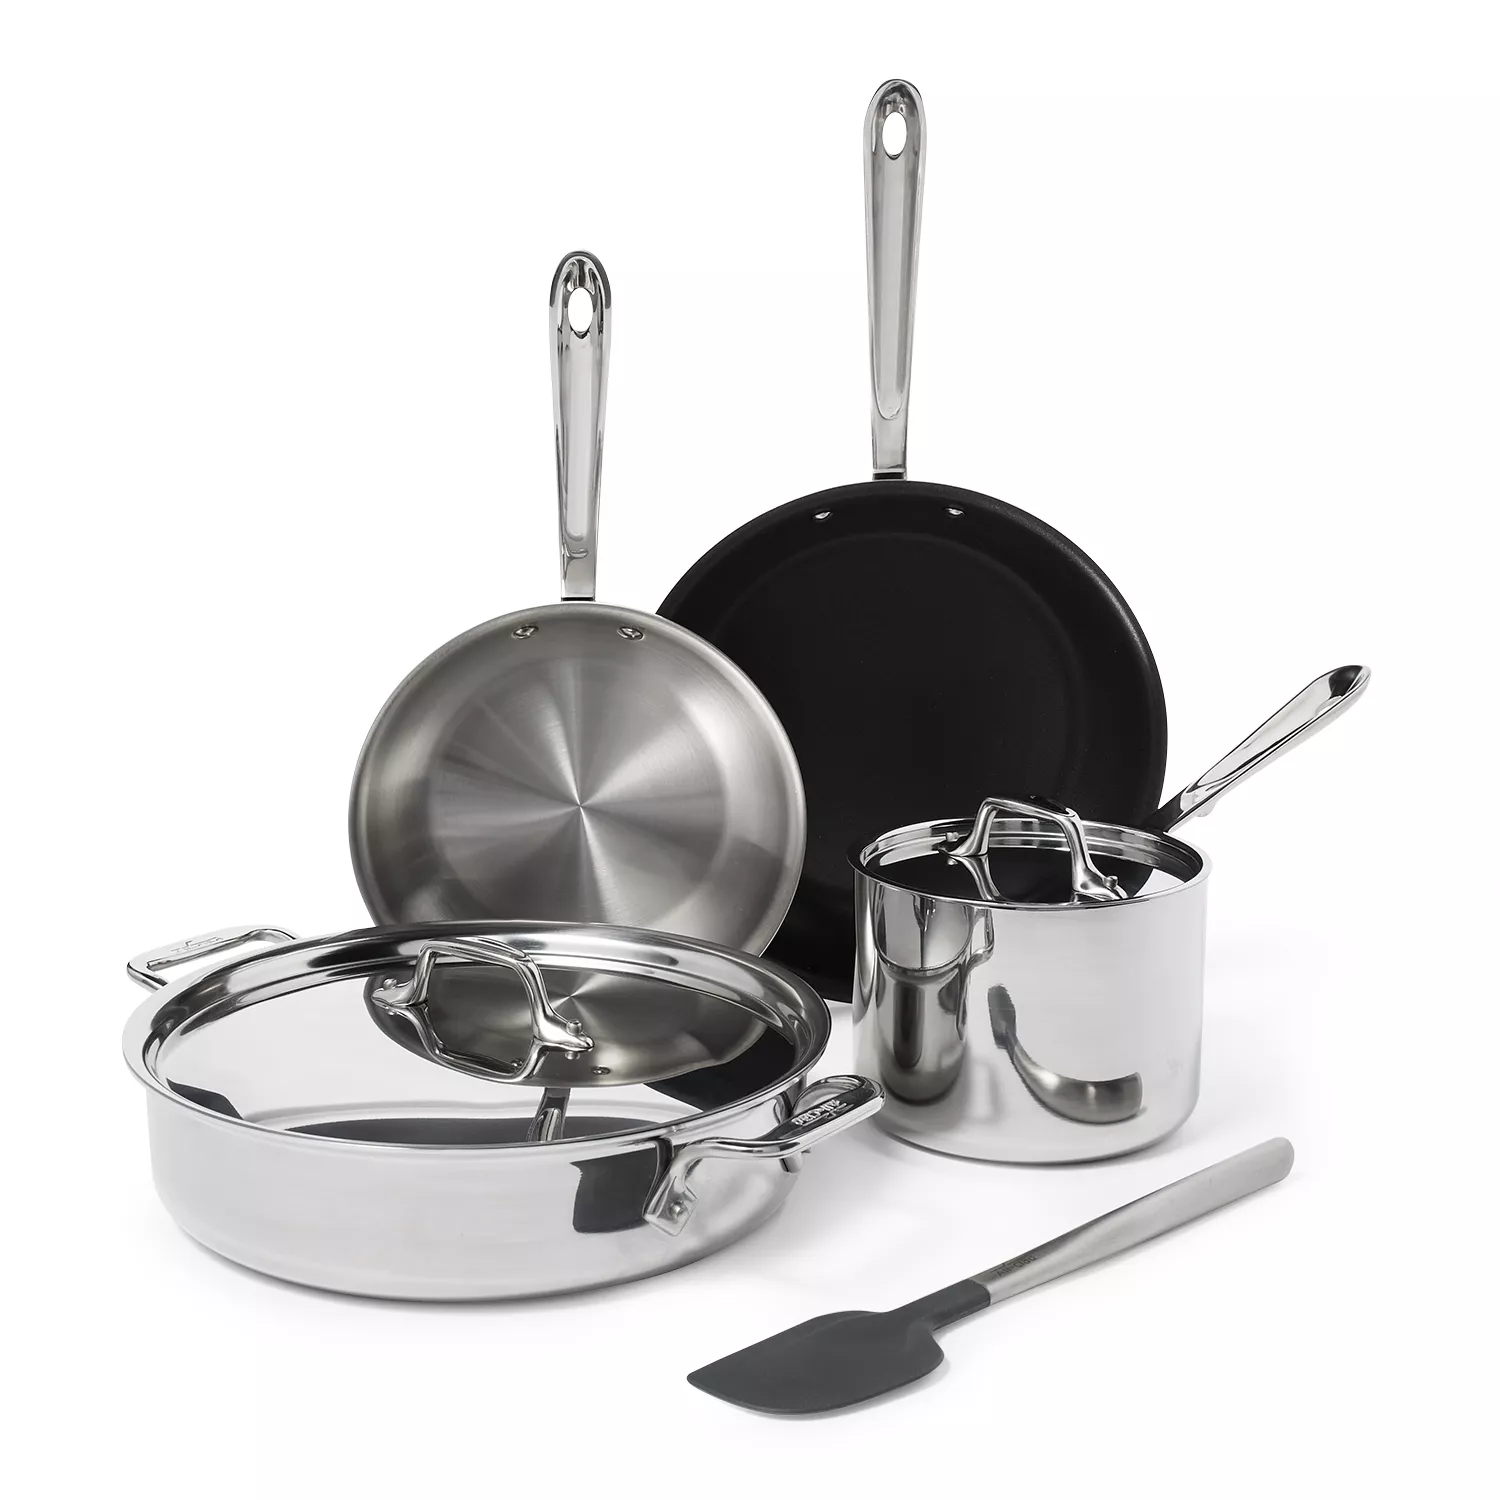 All-Clad D3 Stainless Steel 7-Piece Cookware Set, Stainless Steel